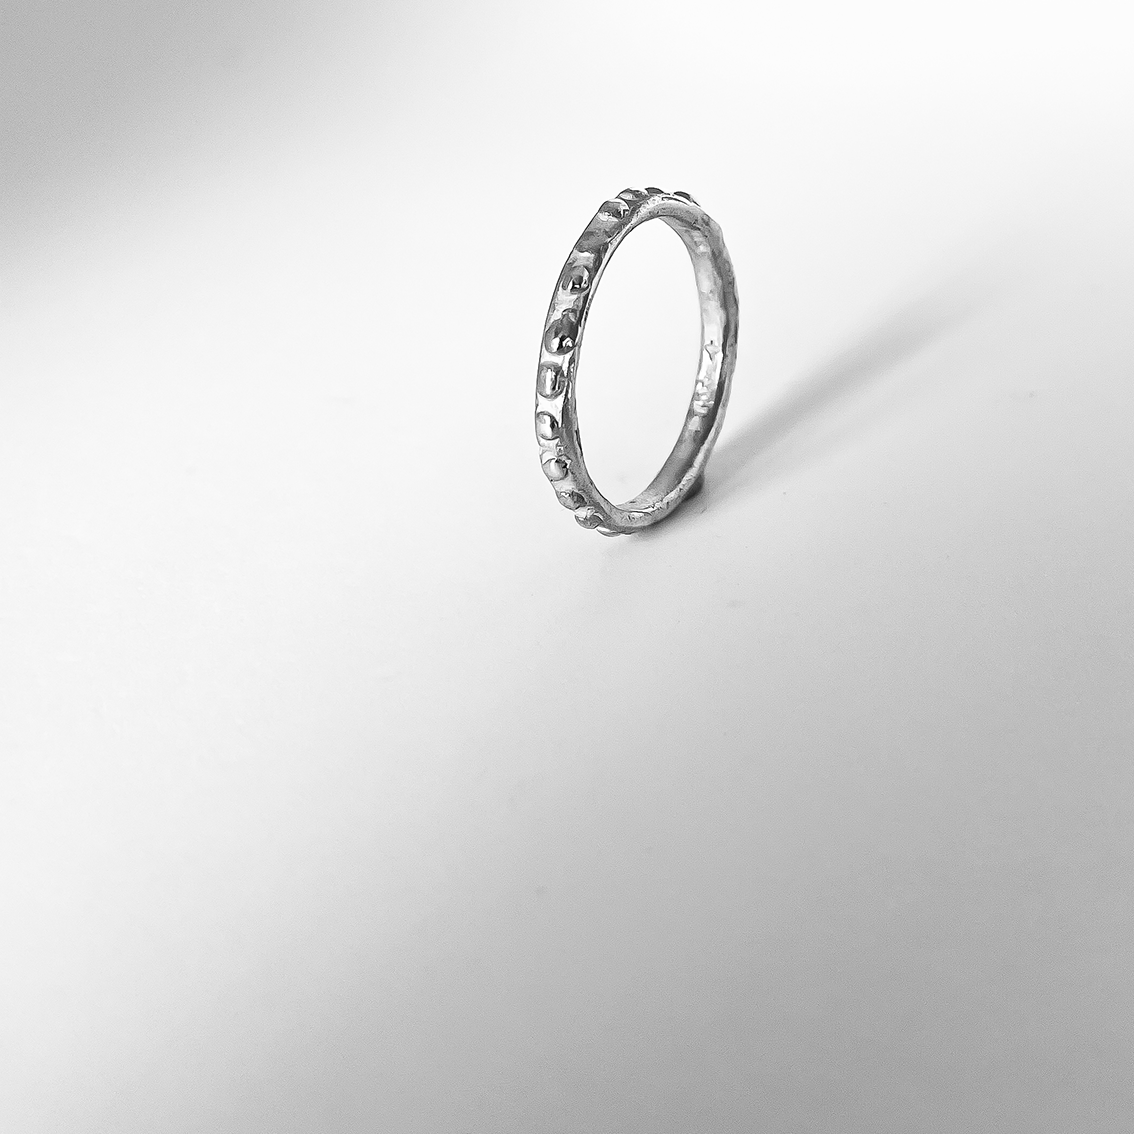 Organic Delicate Stacking Ring in Sterling Silver with a textured surface